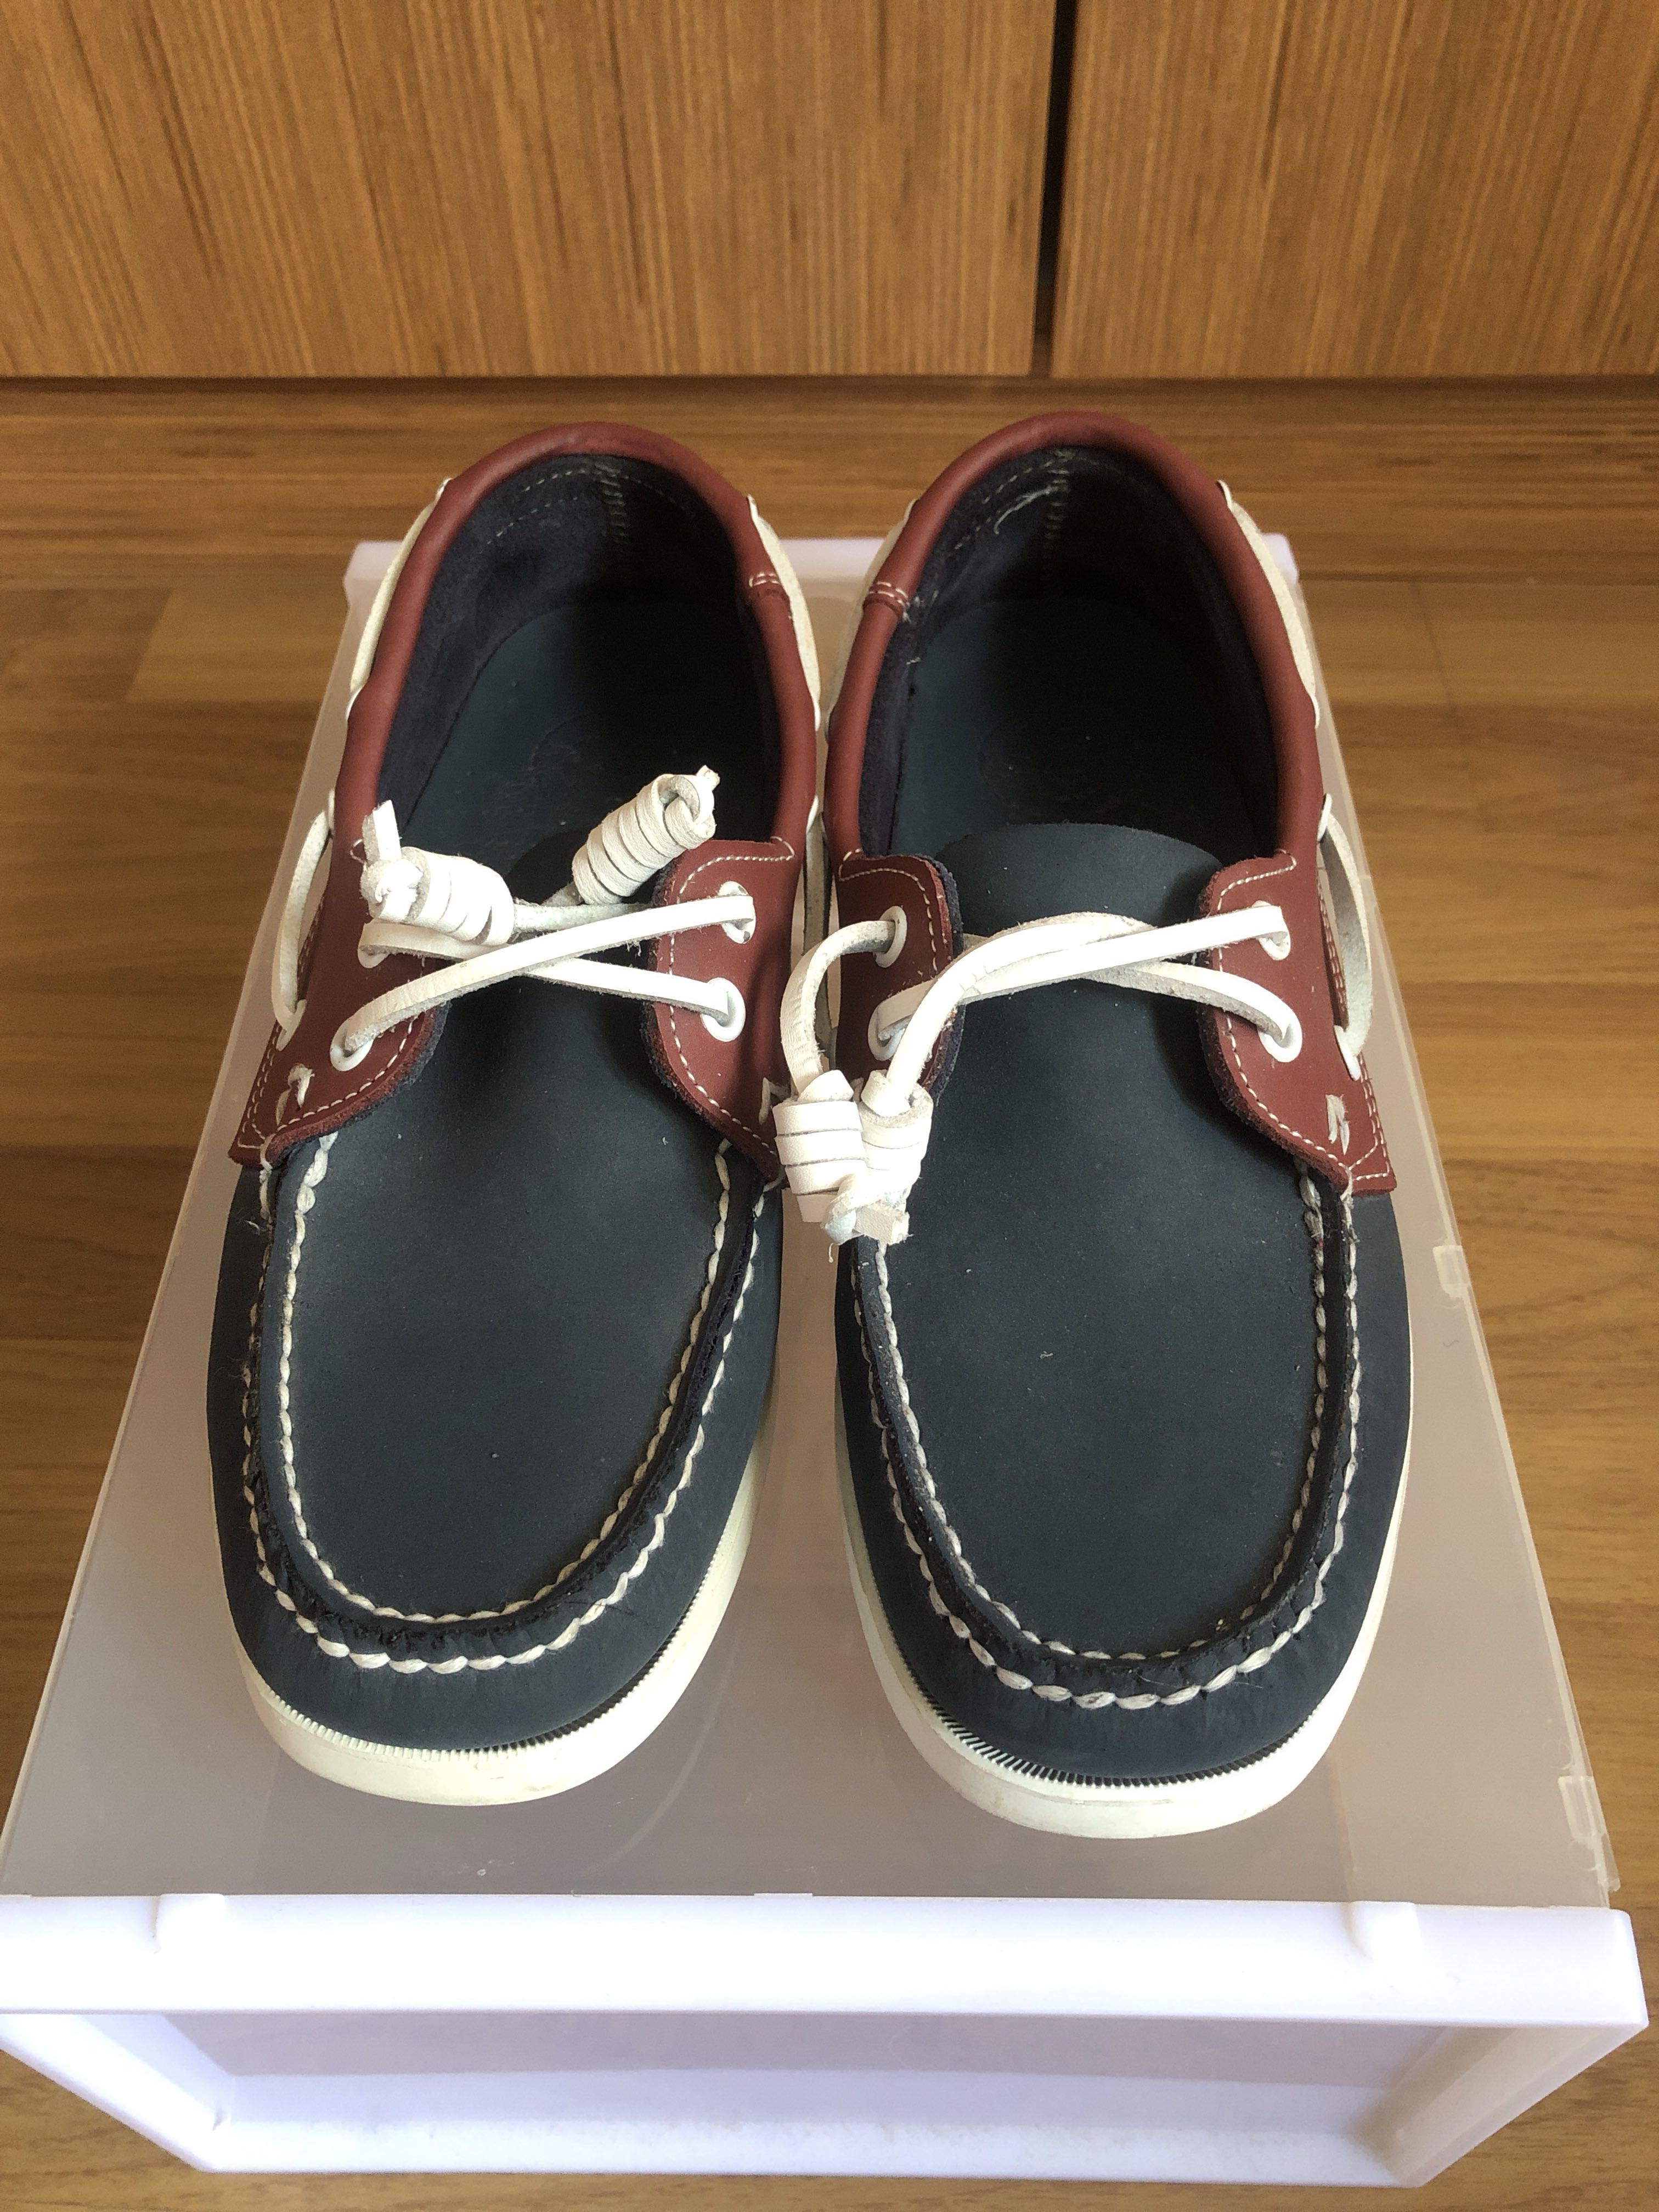 hype boat shoes